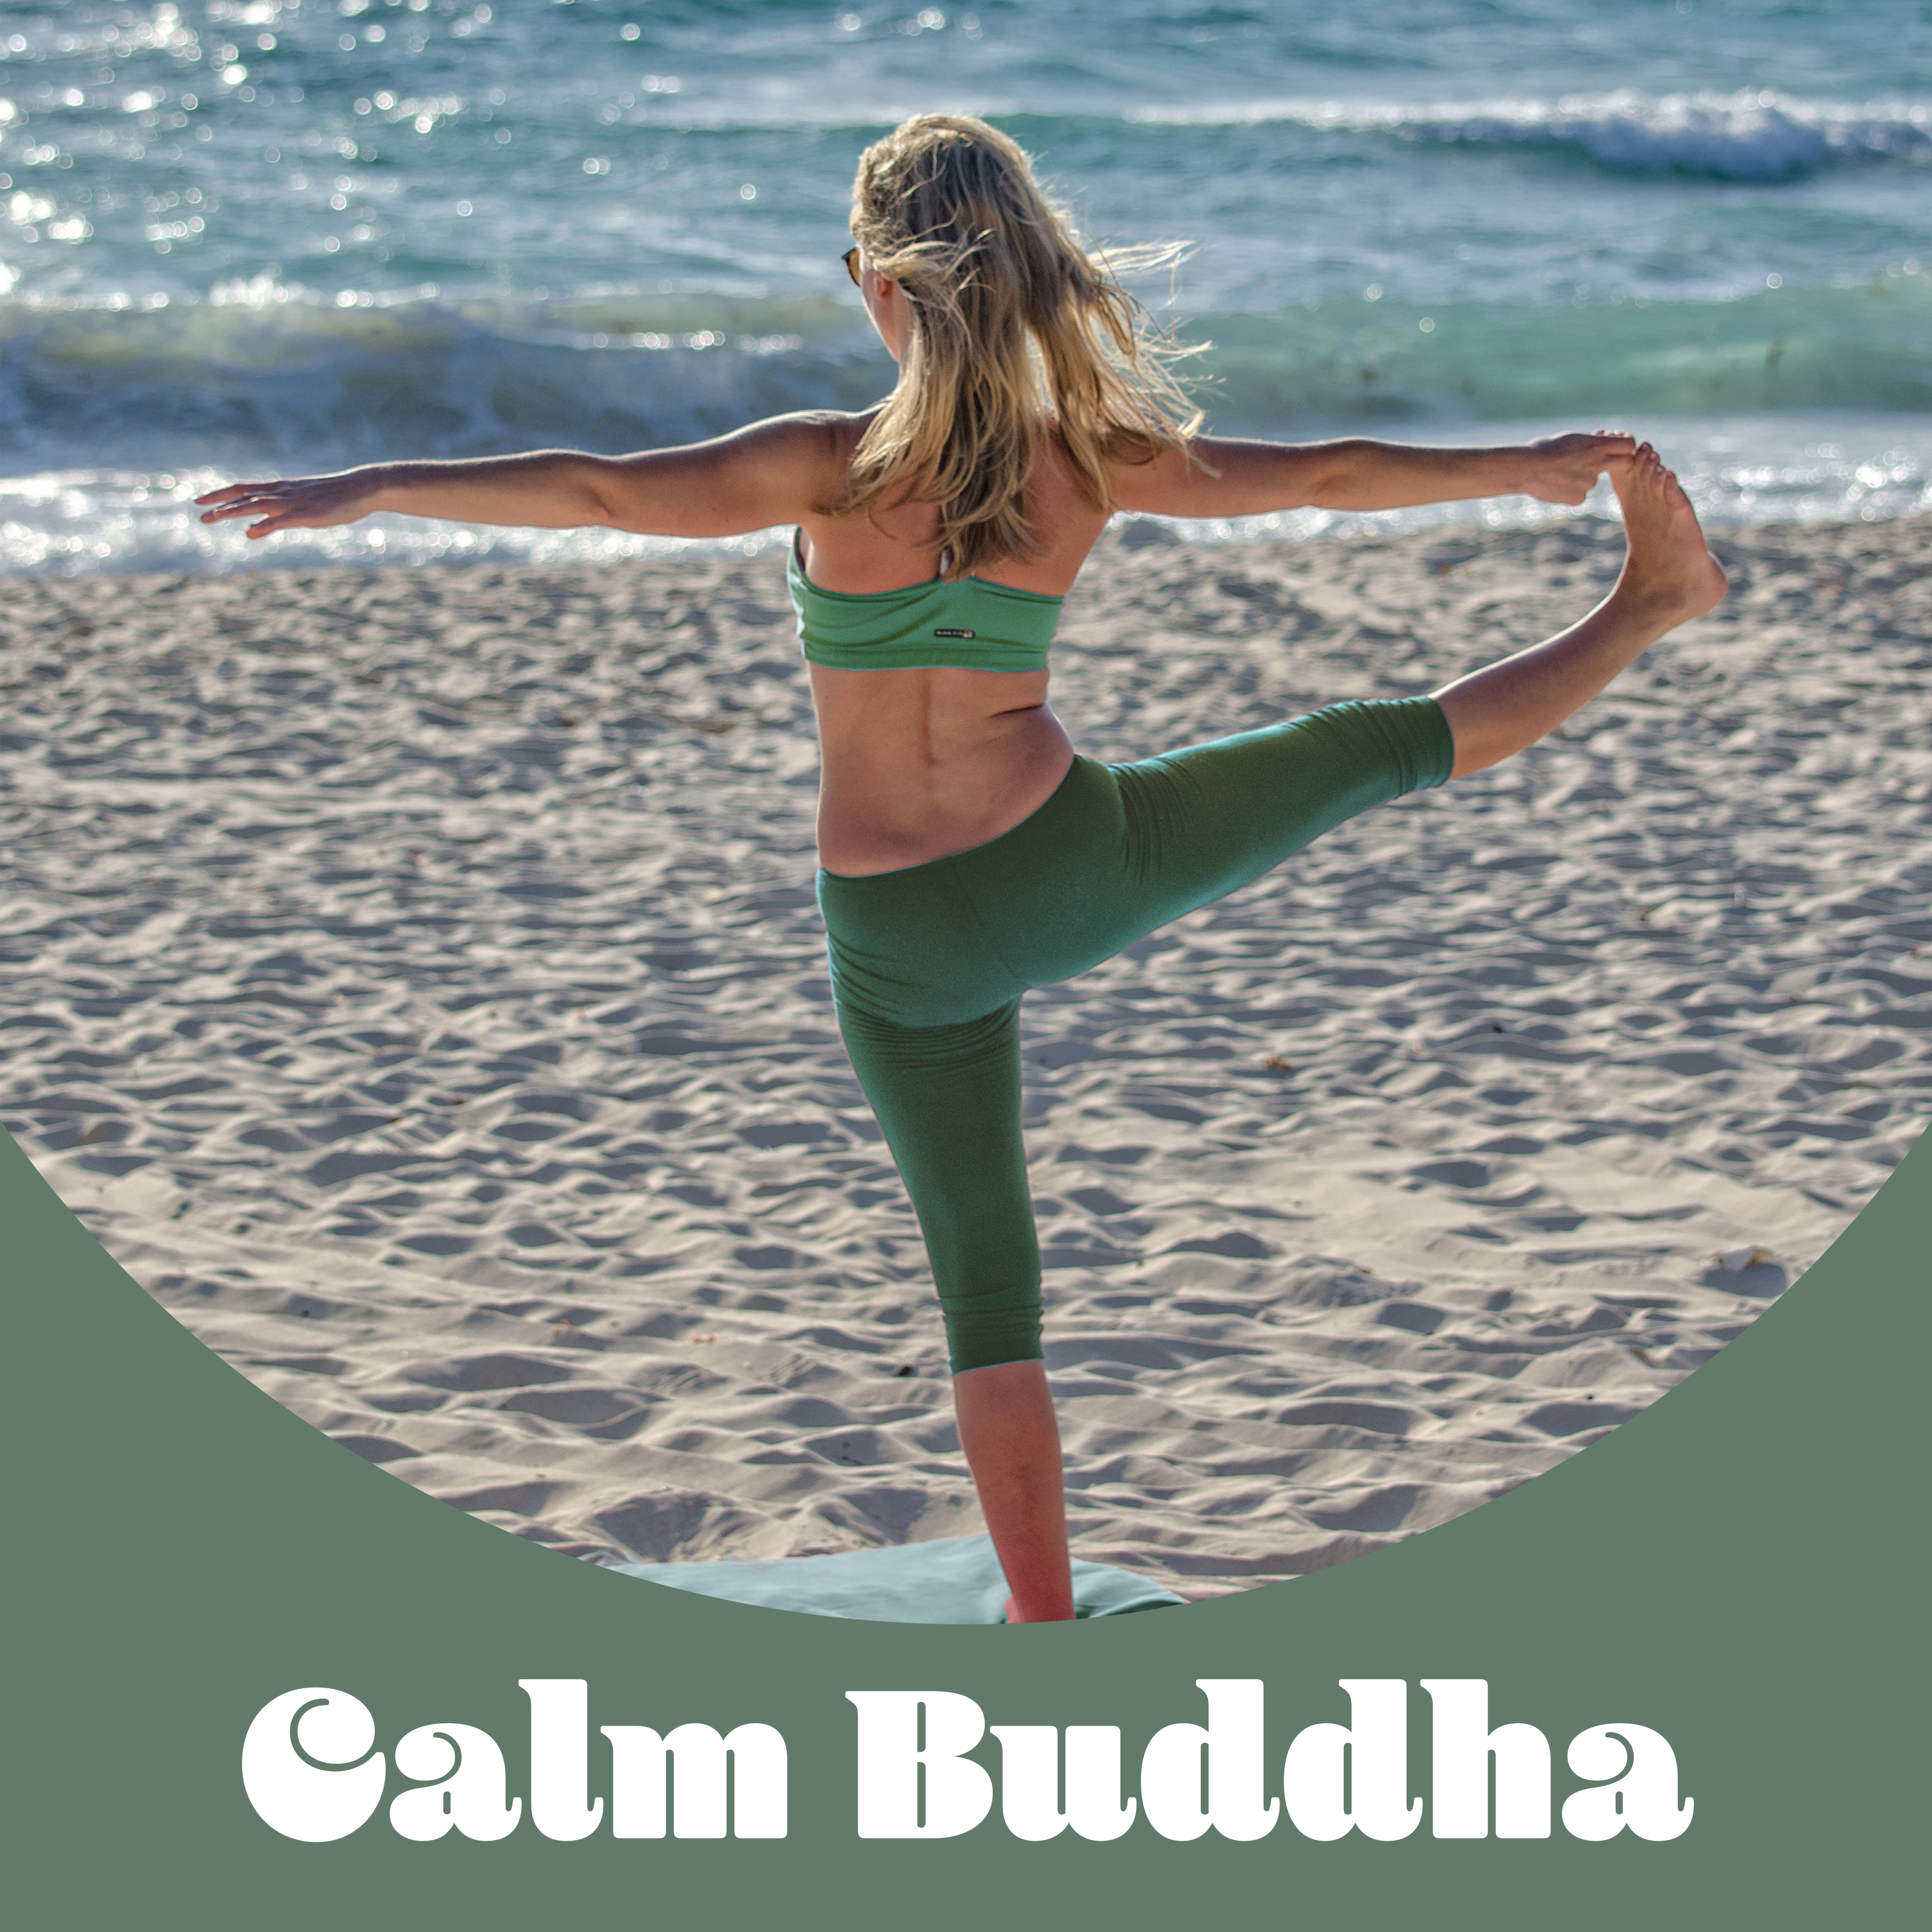 Calm Buddha – Rest with New Age Music, Meditation Sounds, Relaxing Waves